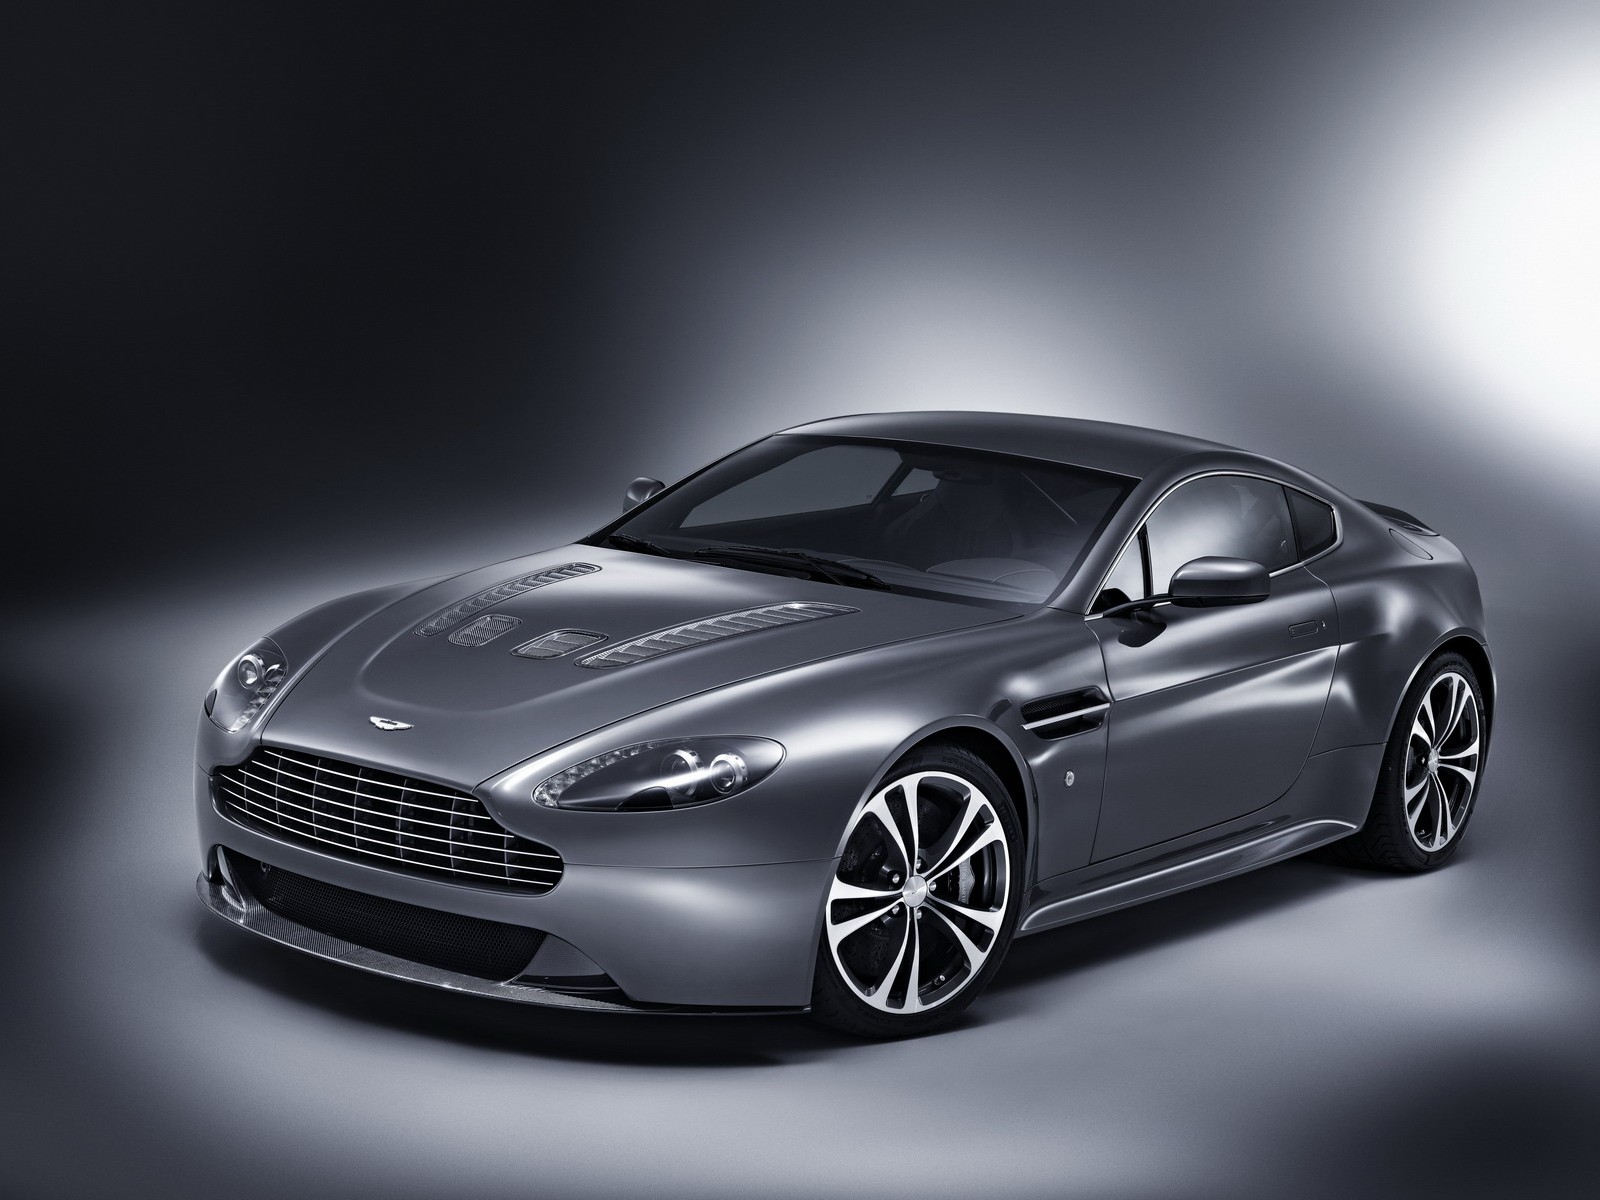 Hope you like this amazing aston martin V12 Vantage wallpaper background in high resolution as much as we do!